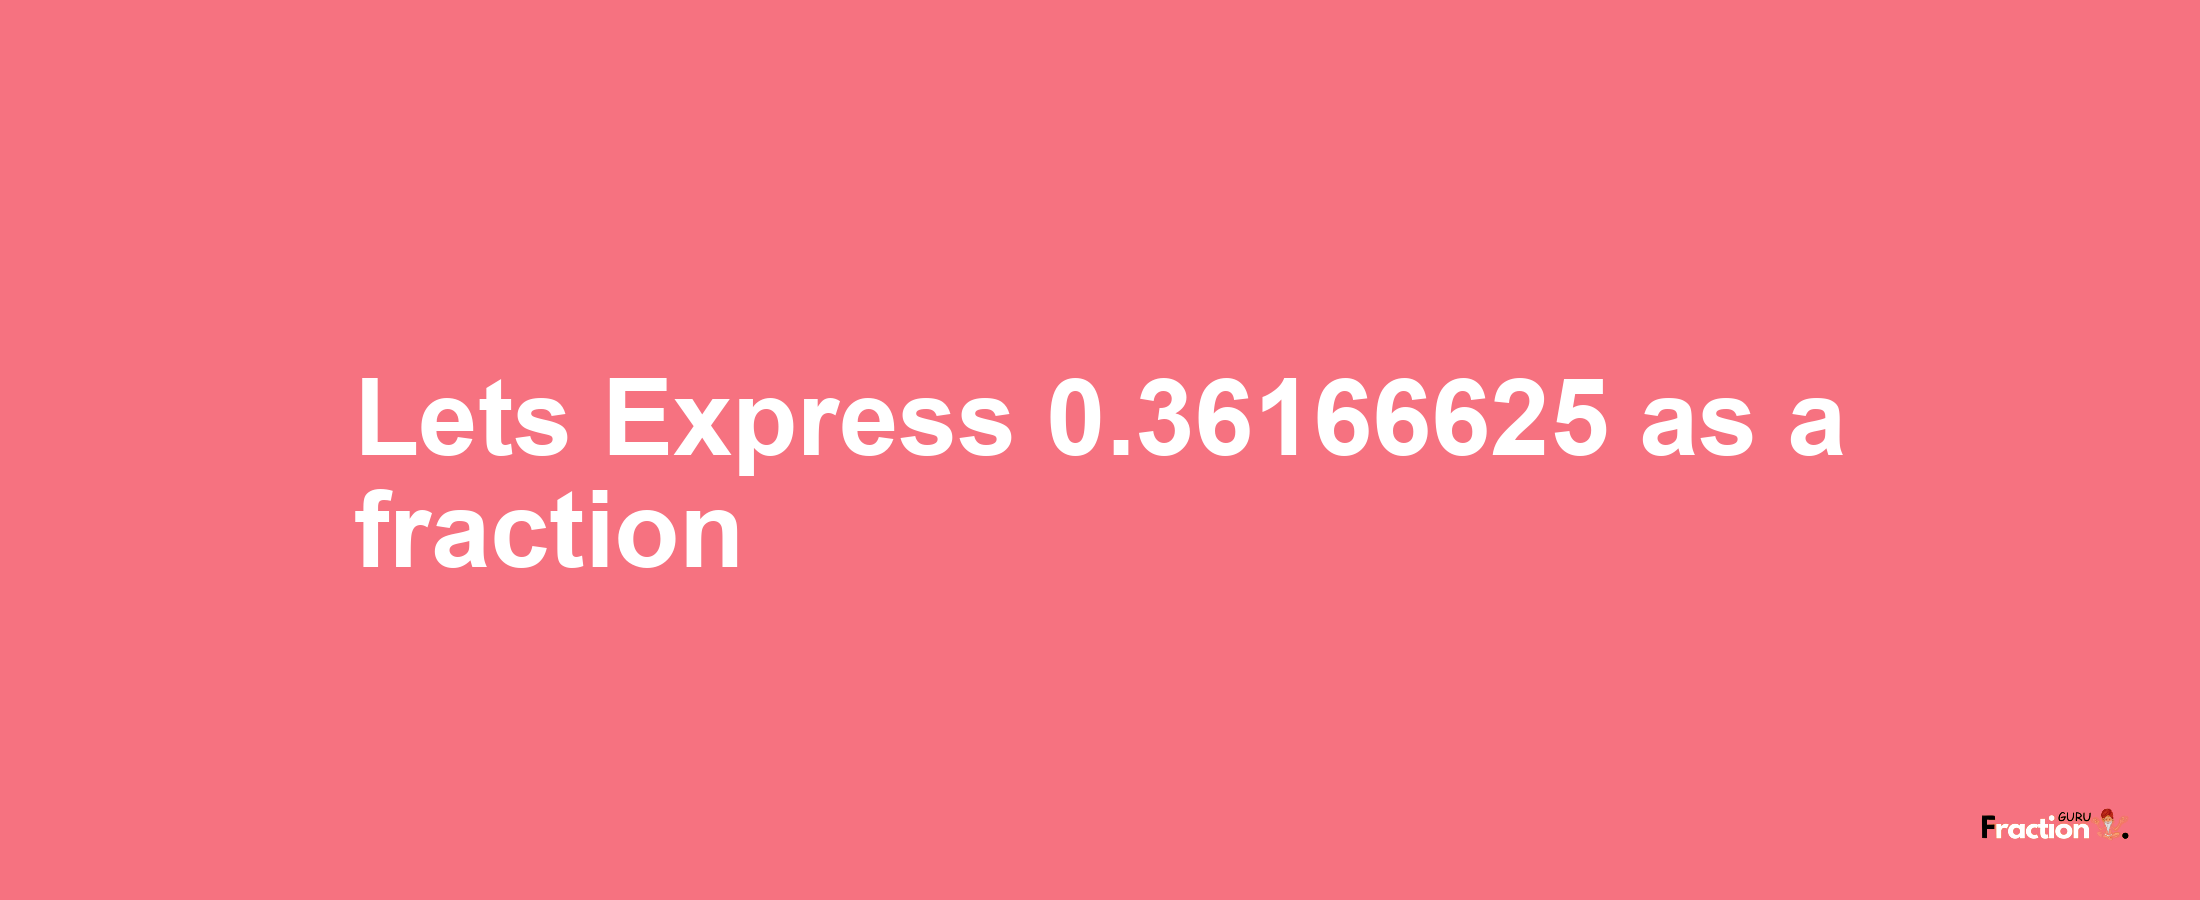 Lets Express 0.36166625 as afraction